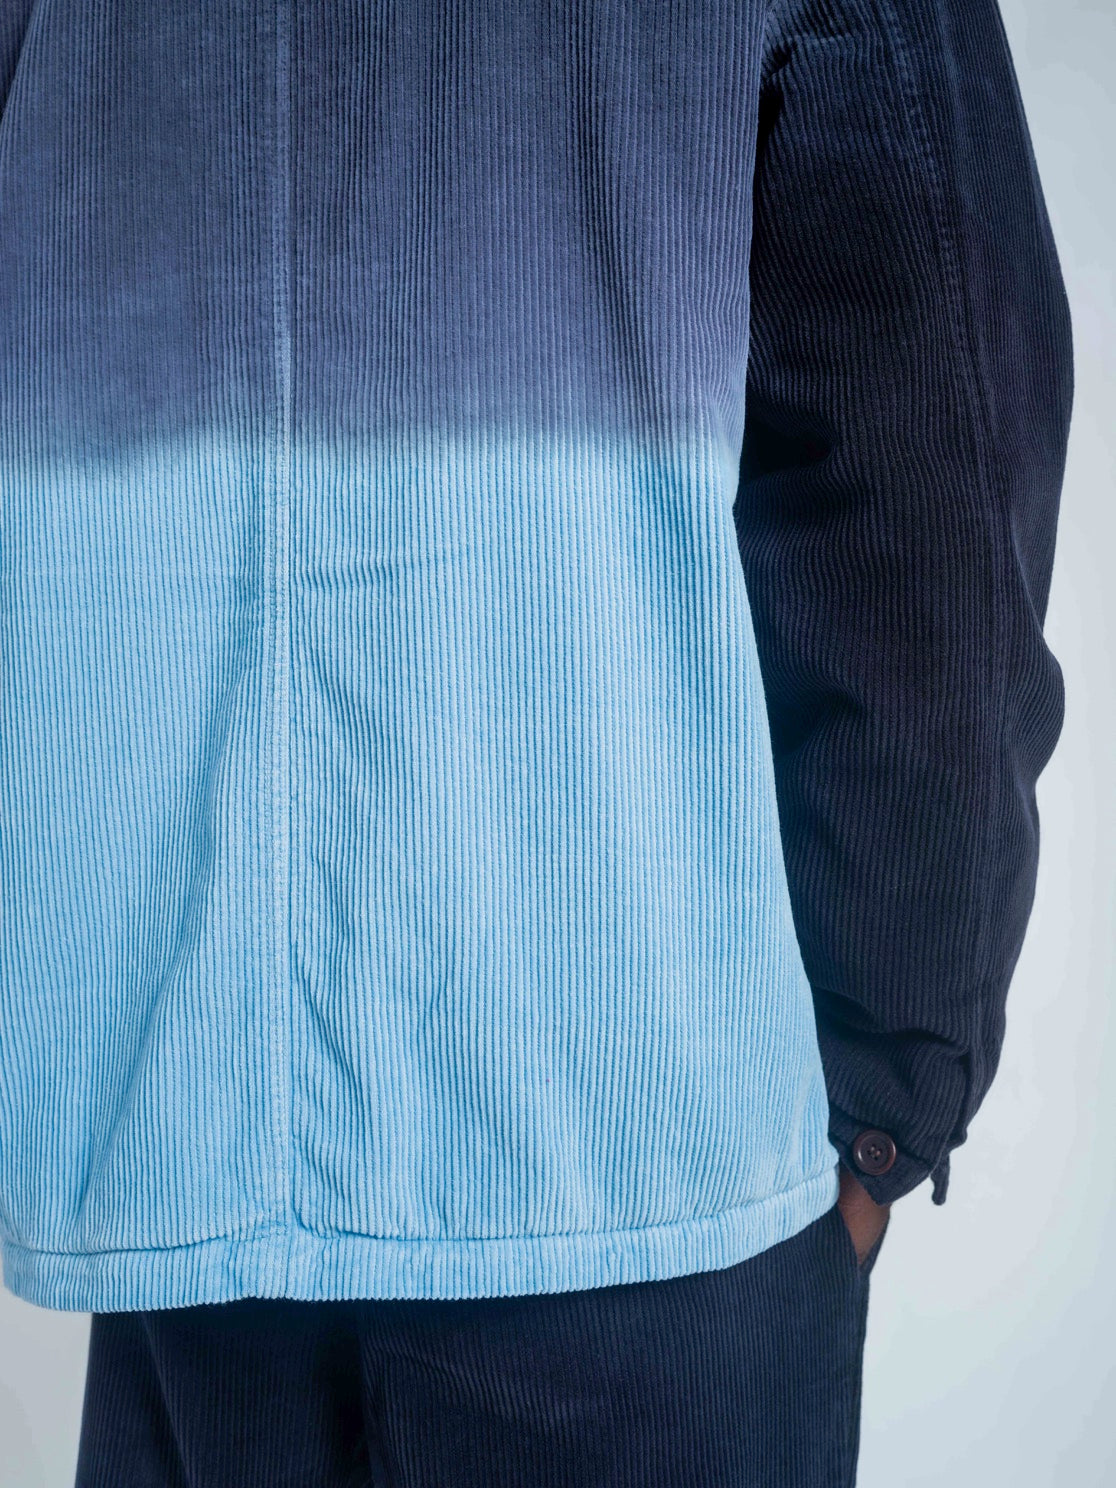 JACKET GRADIENT CHARCOAL & CLEAR BLUE